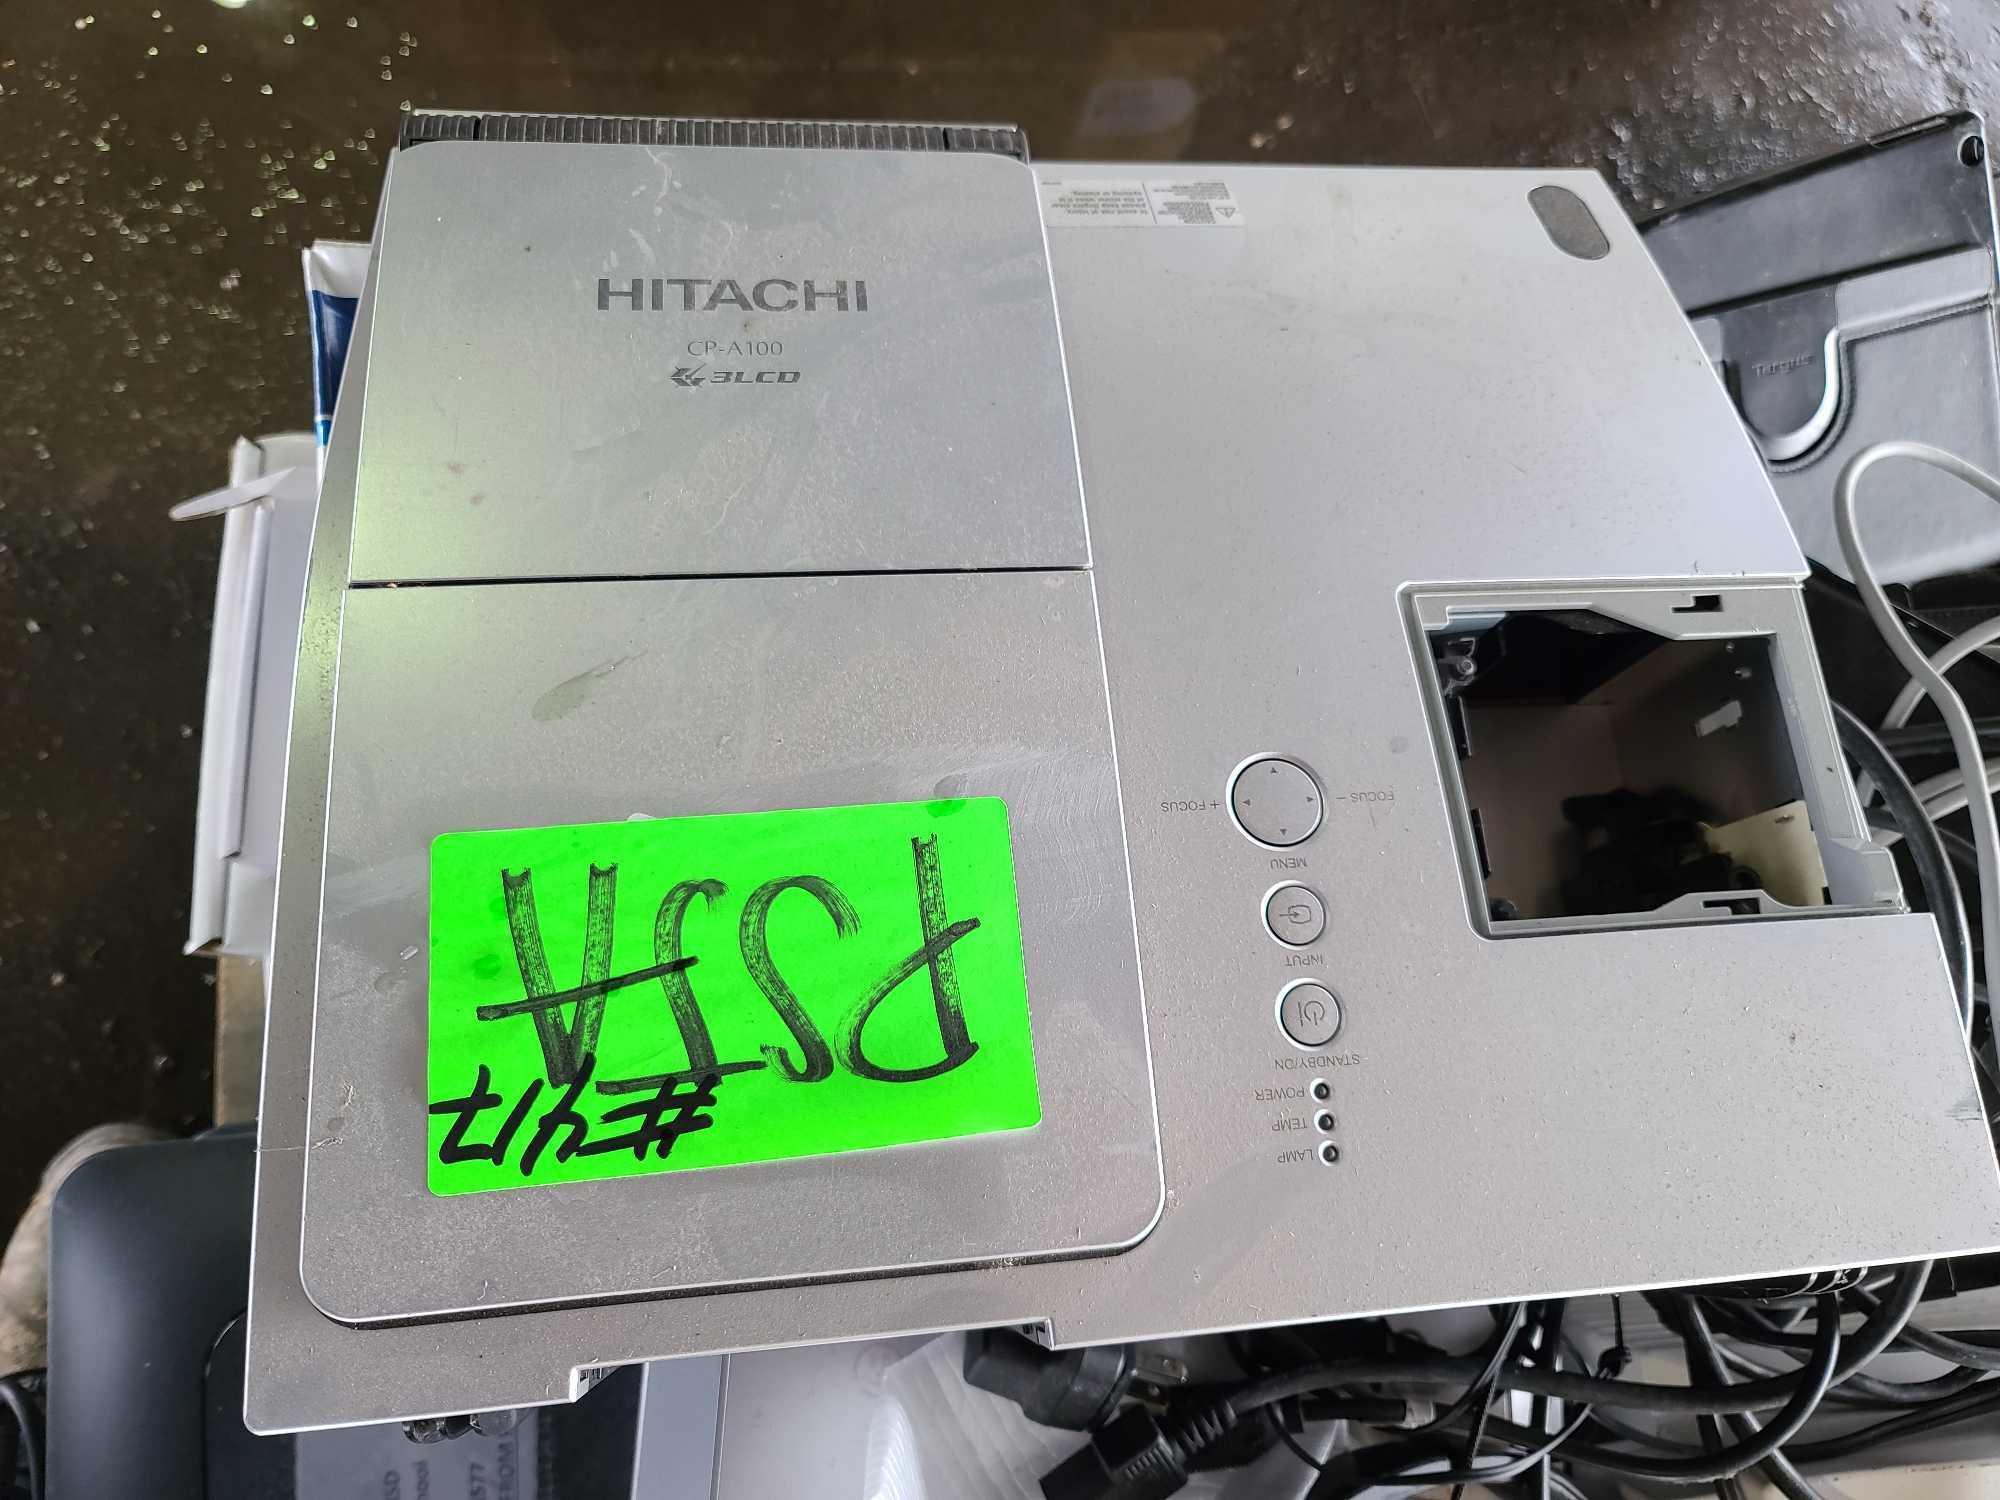 Hitachi CP-A100 3LCD Projector, HP Scanjet G4050 Flatbed Scanner, OTC Wireless Wiser 2400